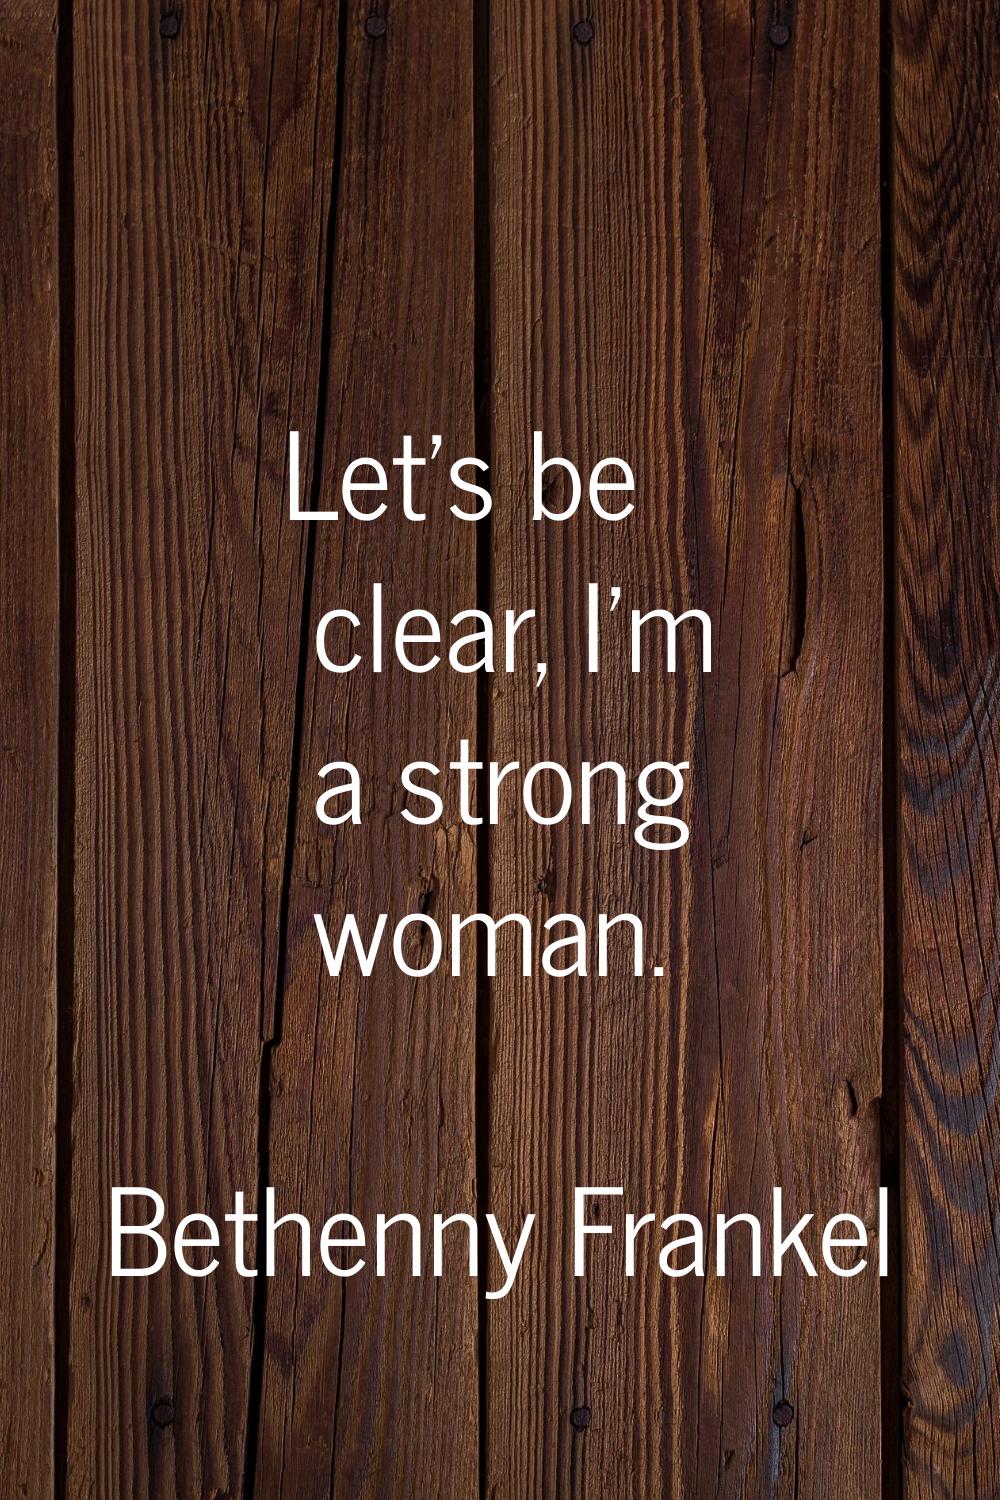 Let's be clear, I'm a strong woman.